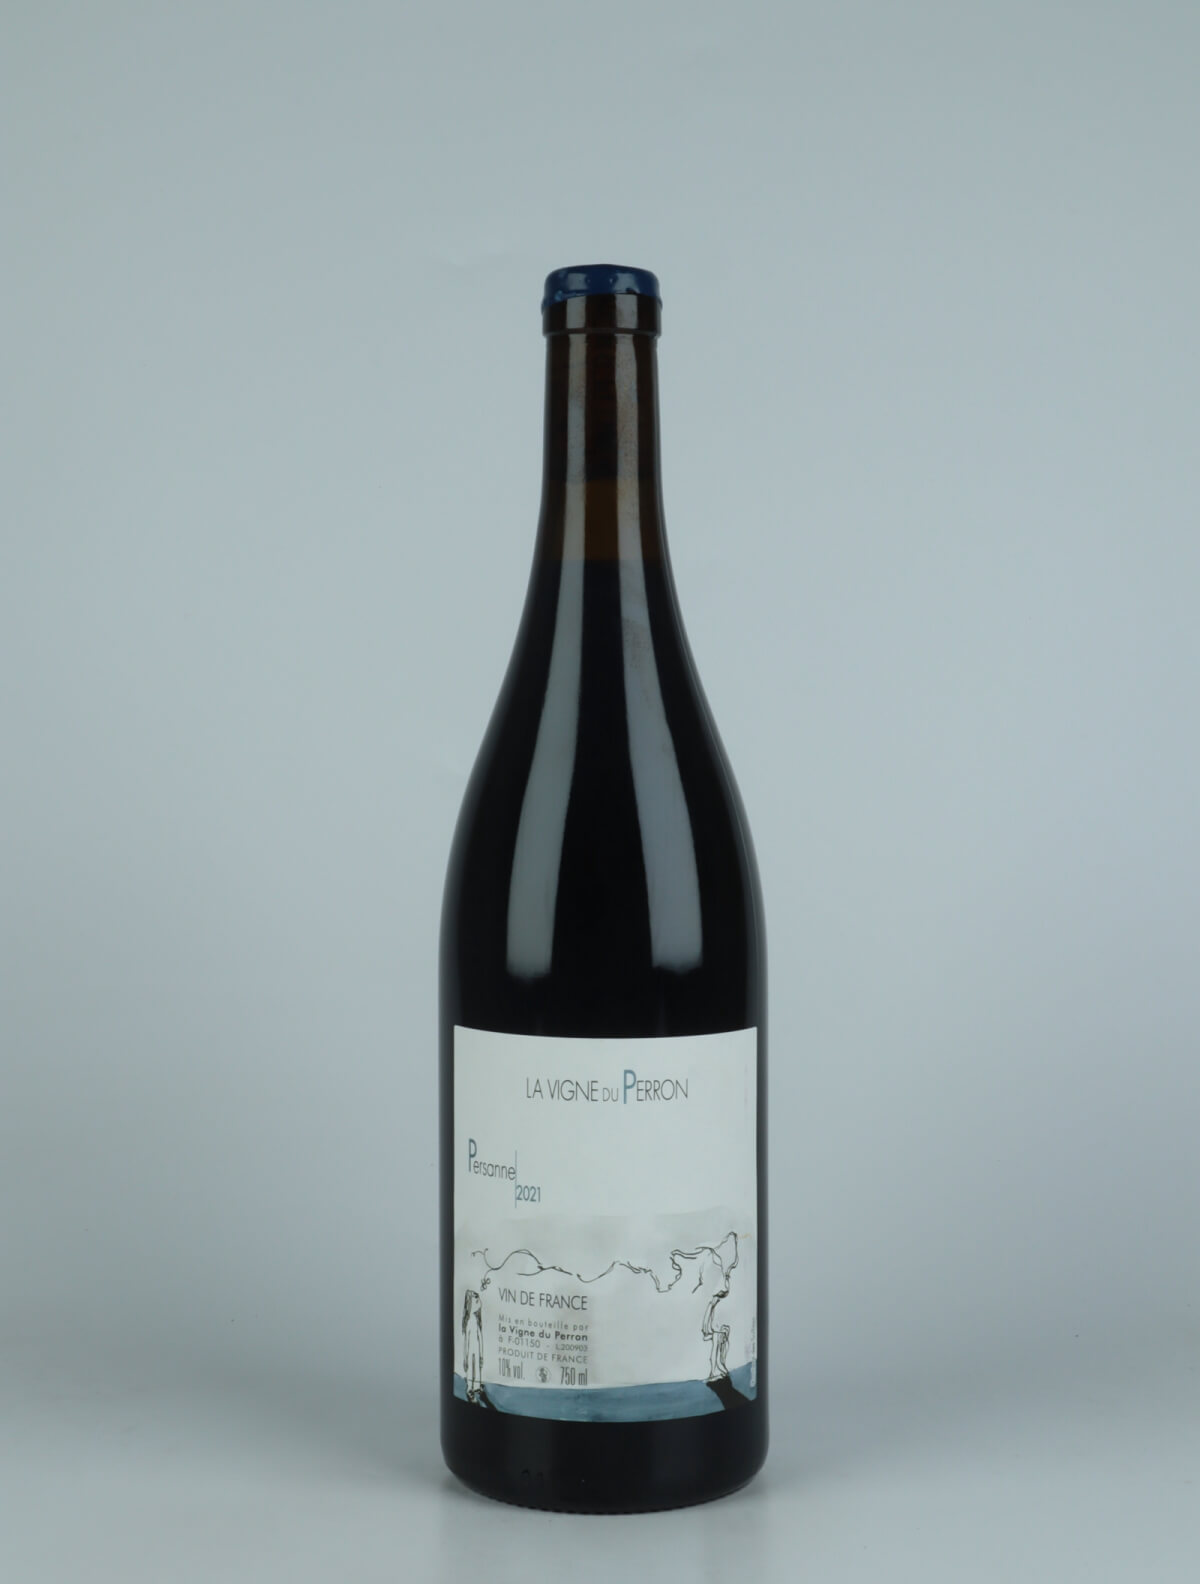 A bottle 2021 Persanne Red wine from Domaine du Perron, Bugey in France